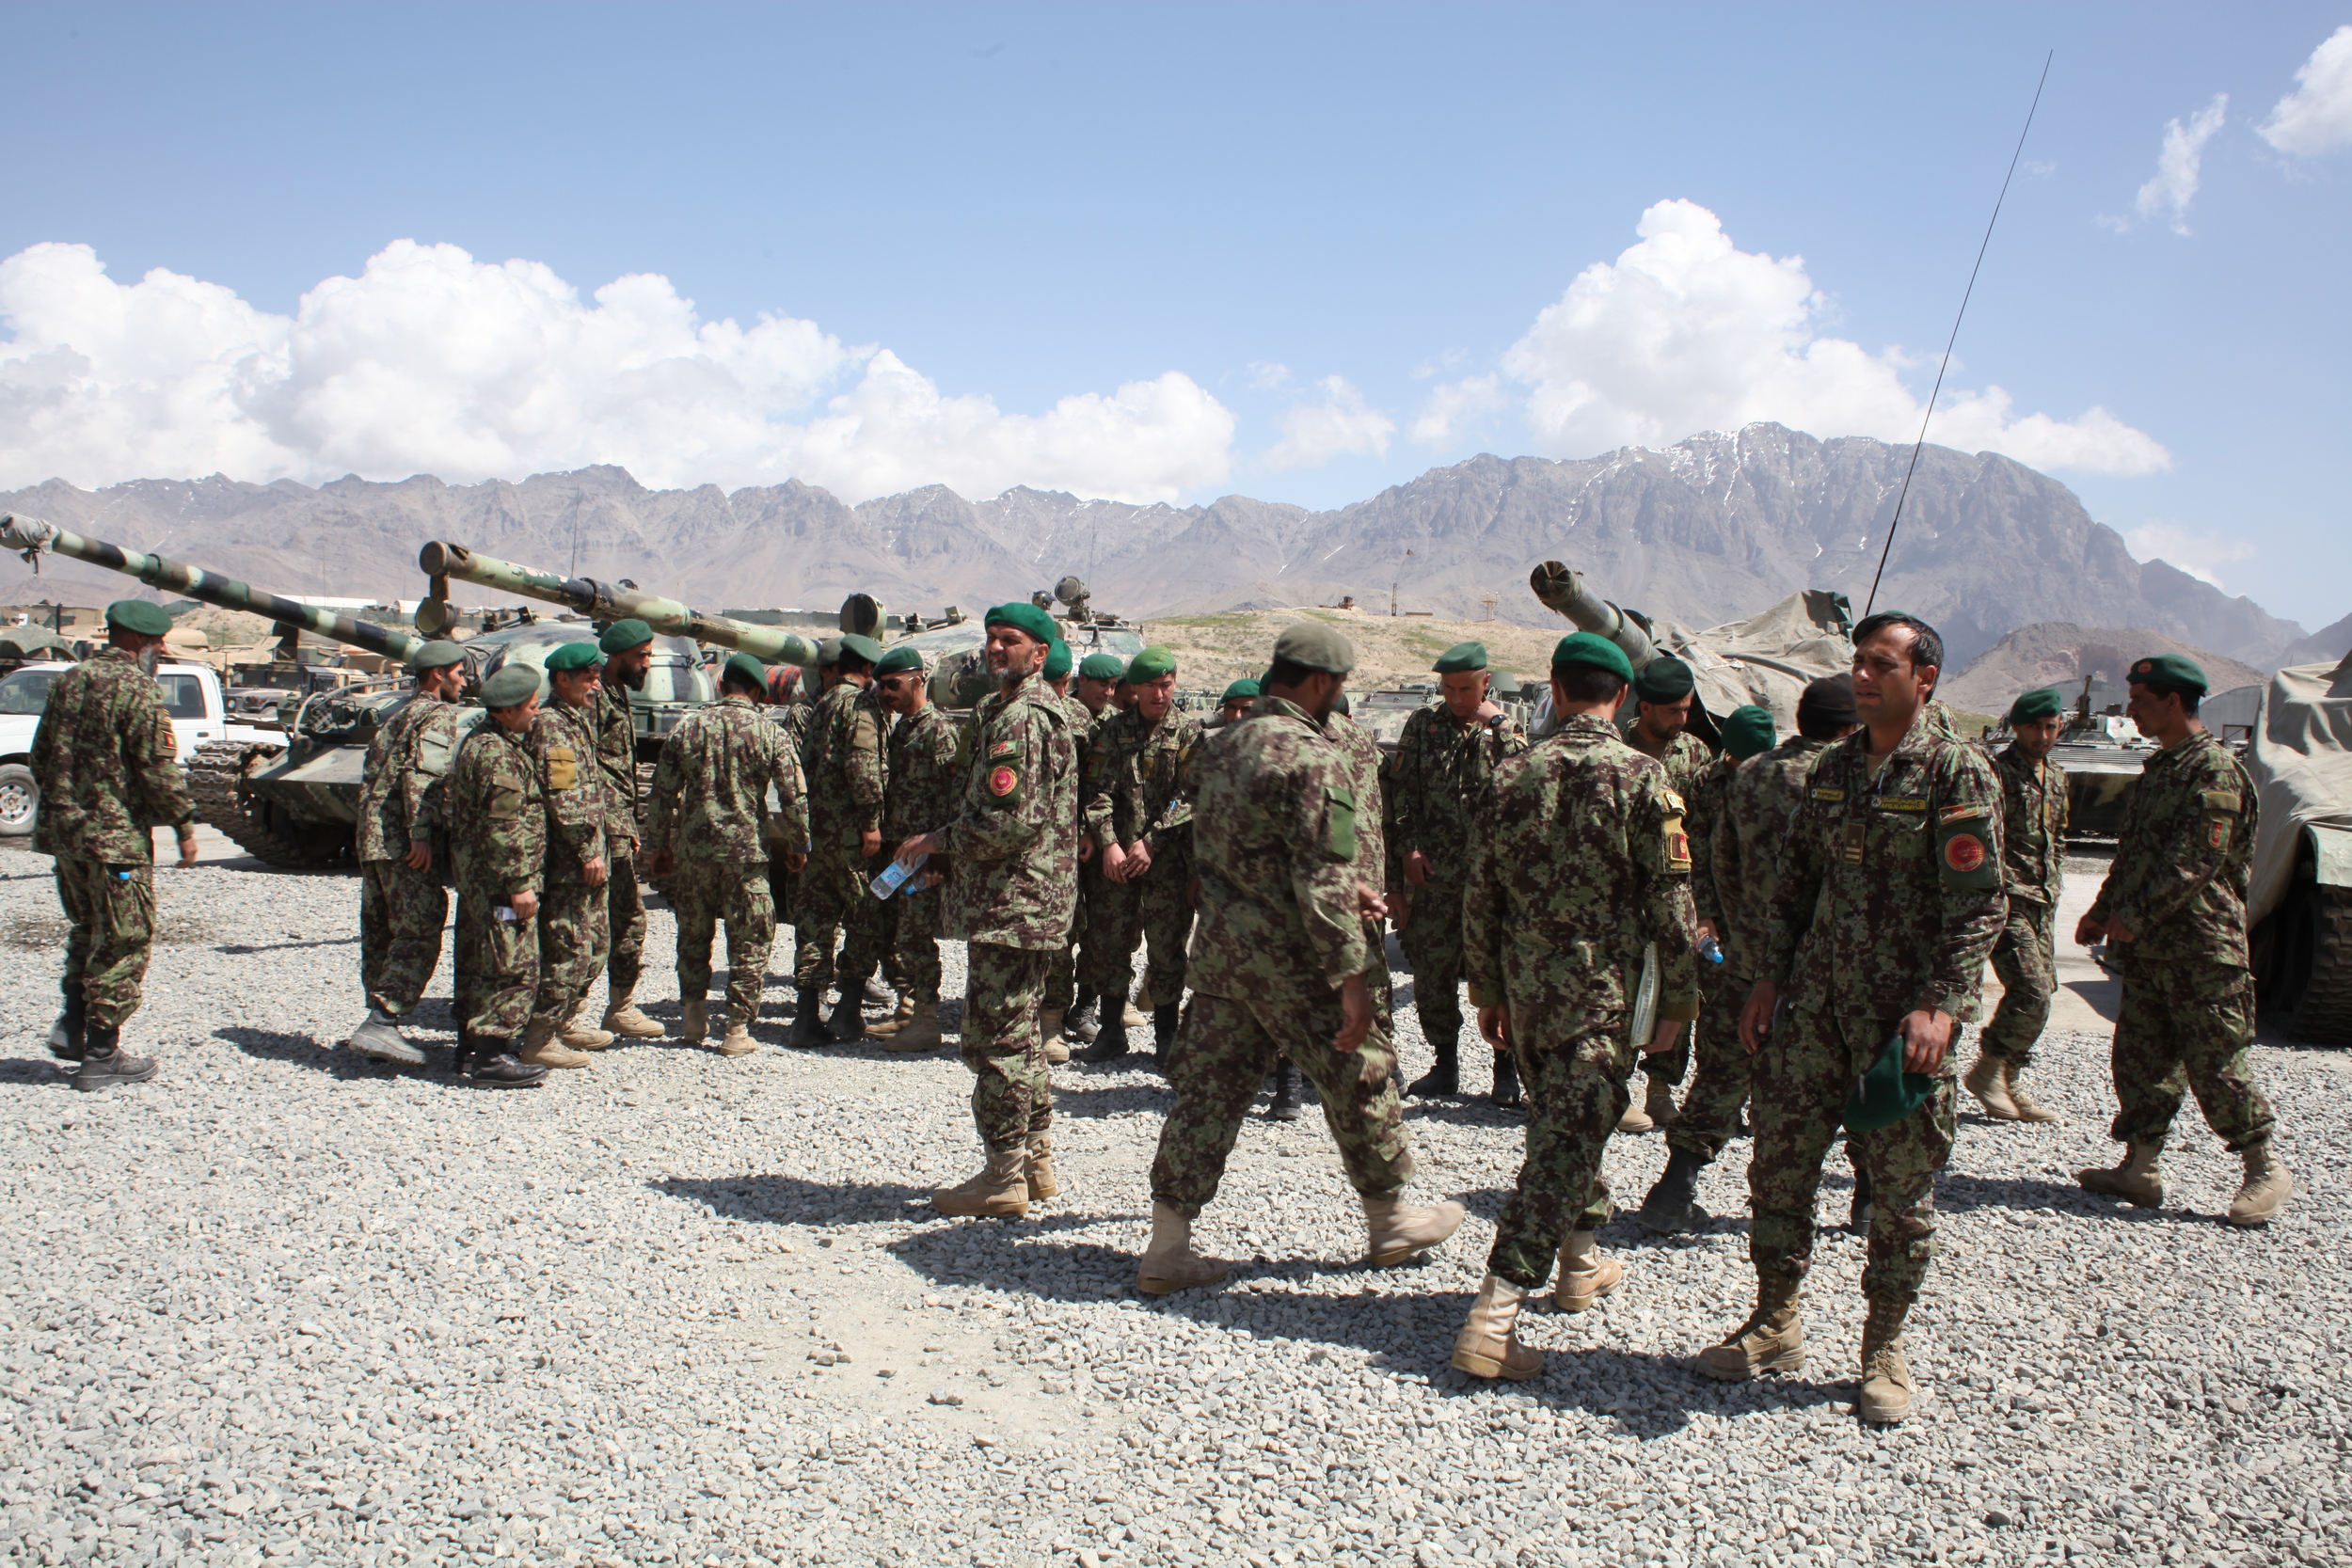   Located just outside of Kabul, the 111 Battalion Military base is home to a faction of the Afghan National Army. Here soldiers from a broad range of tribal, linguistic, and ethnic backgrounds serve together under the umbrella of one Afghanistan.  